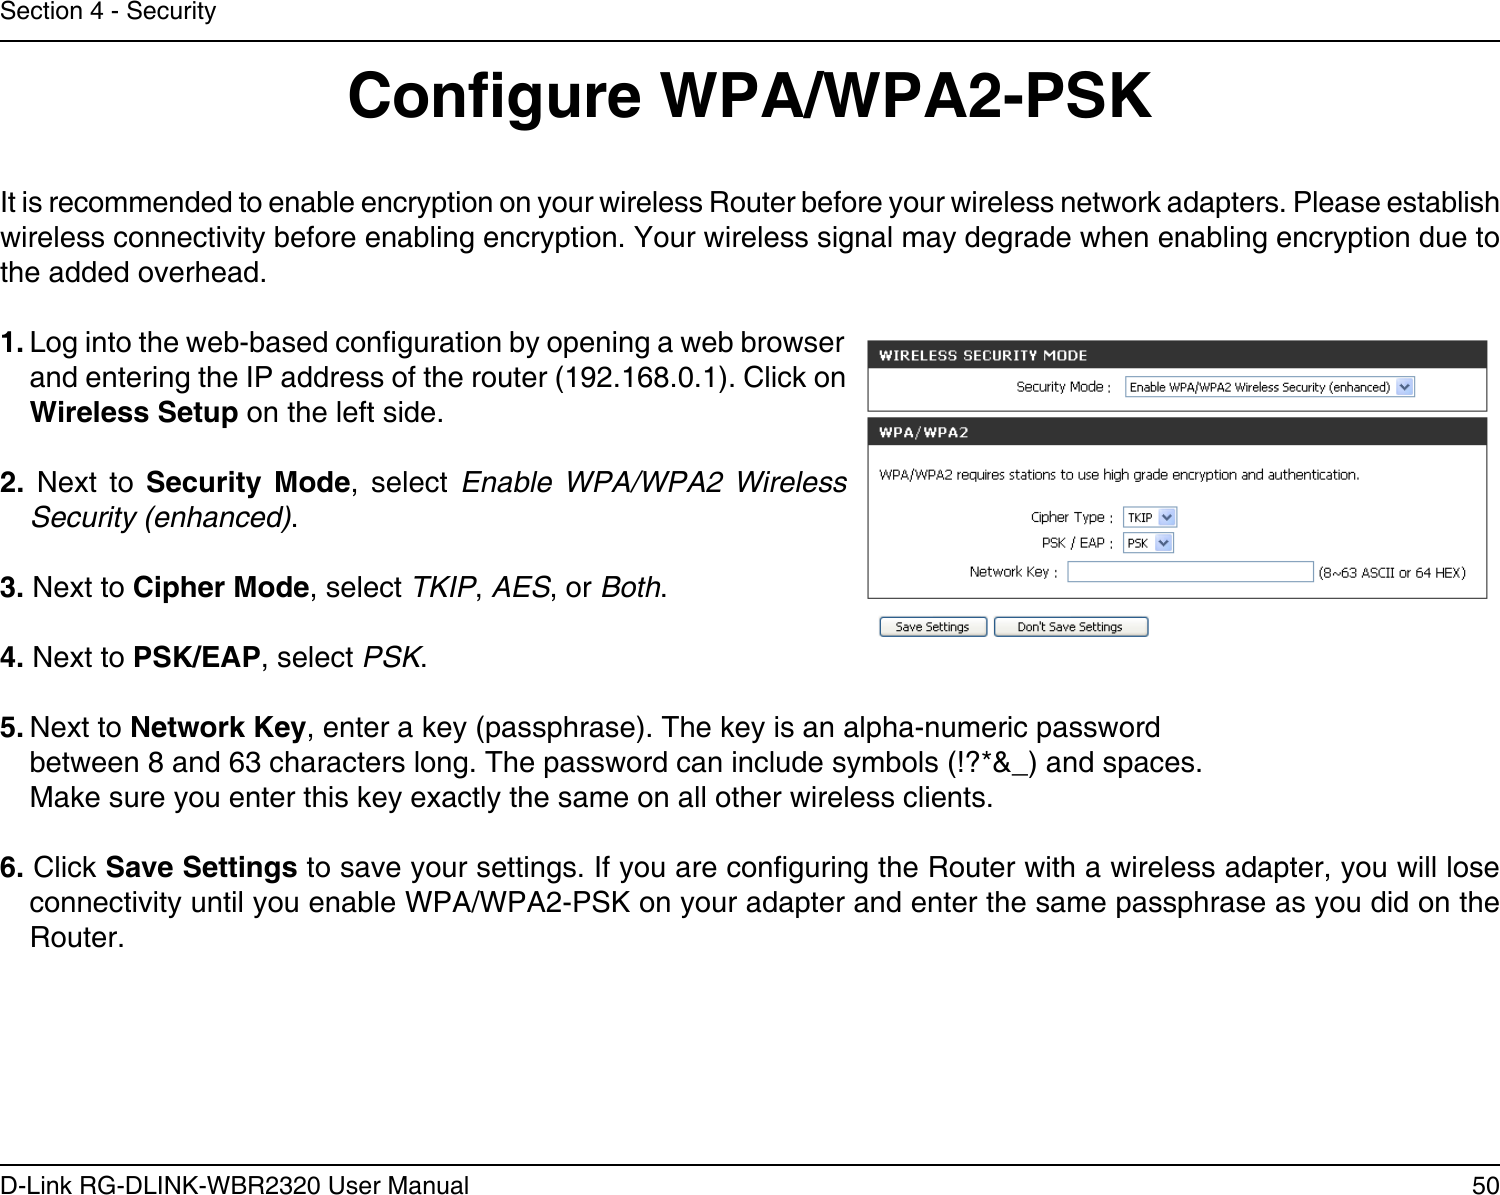 50D-Link RG-DLINK-WBR2320 User ManualSection 4 - SecurityCongure WPA/WPA2-PSKIt is recommended to enable encryption on your wireless Router before your wireless network adapters. Please establish wireless connectivity before enabling encryption. Your wireless signal may degrade when enabling encryption due to the added overhead.1. Log into the web-based conguration by opening a web browser and entering the IP address of the router (192.168.0.1). Click on Wireless Setup on the left side.2.  Next  to  Security  Mode,  select  Enable  WPA/WPA2  Wireless Security (enhanced).3. Next to Cipher Mode, select TKIP, AES, or Both.4. Next to PSK/EAP, select PSK.5. Next to Network Key, enter a key (passphrase). The key is an alpha-numeric passwordbetween 8 and 63 characters long. The password can include symbols (!?*&amp;_) and spaces. Make sure you enter this key exactly the same on all other wireless clients.6. Click Save Settings to save your settings. If you are conguring the Router with a wireless adapter, you will lose connectivity until you enable WPA/WPA2-PSK on your adapter and enter the same passphrase as you did on the Router.